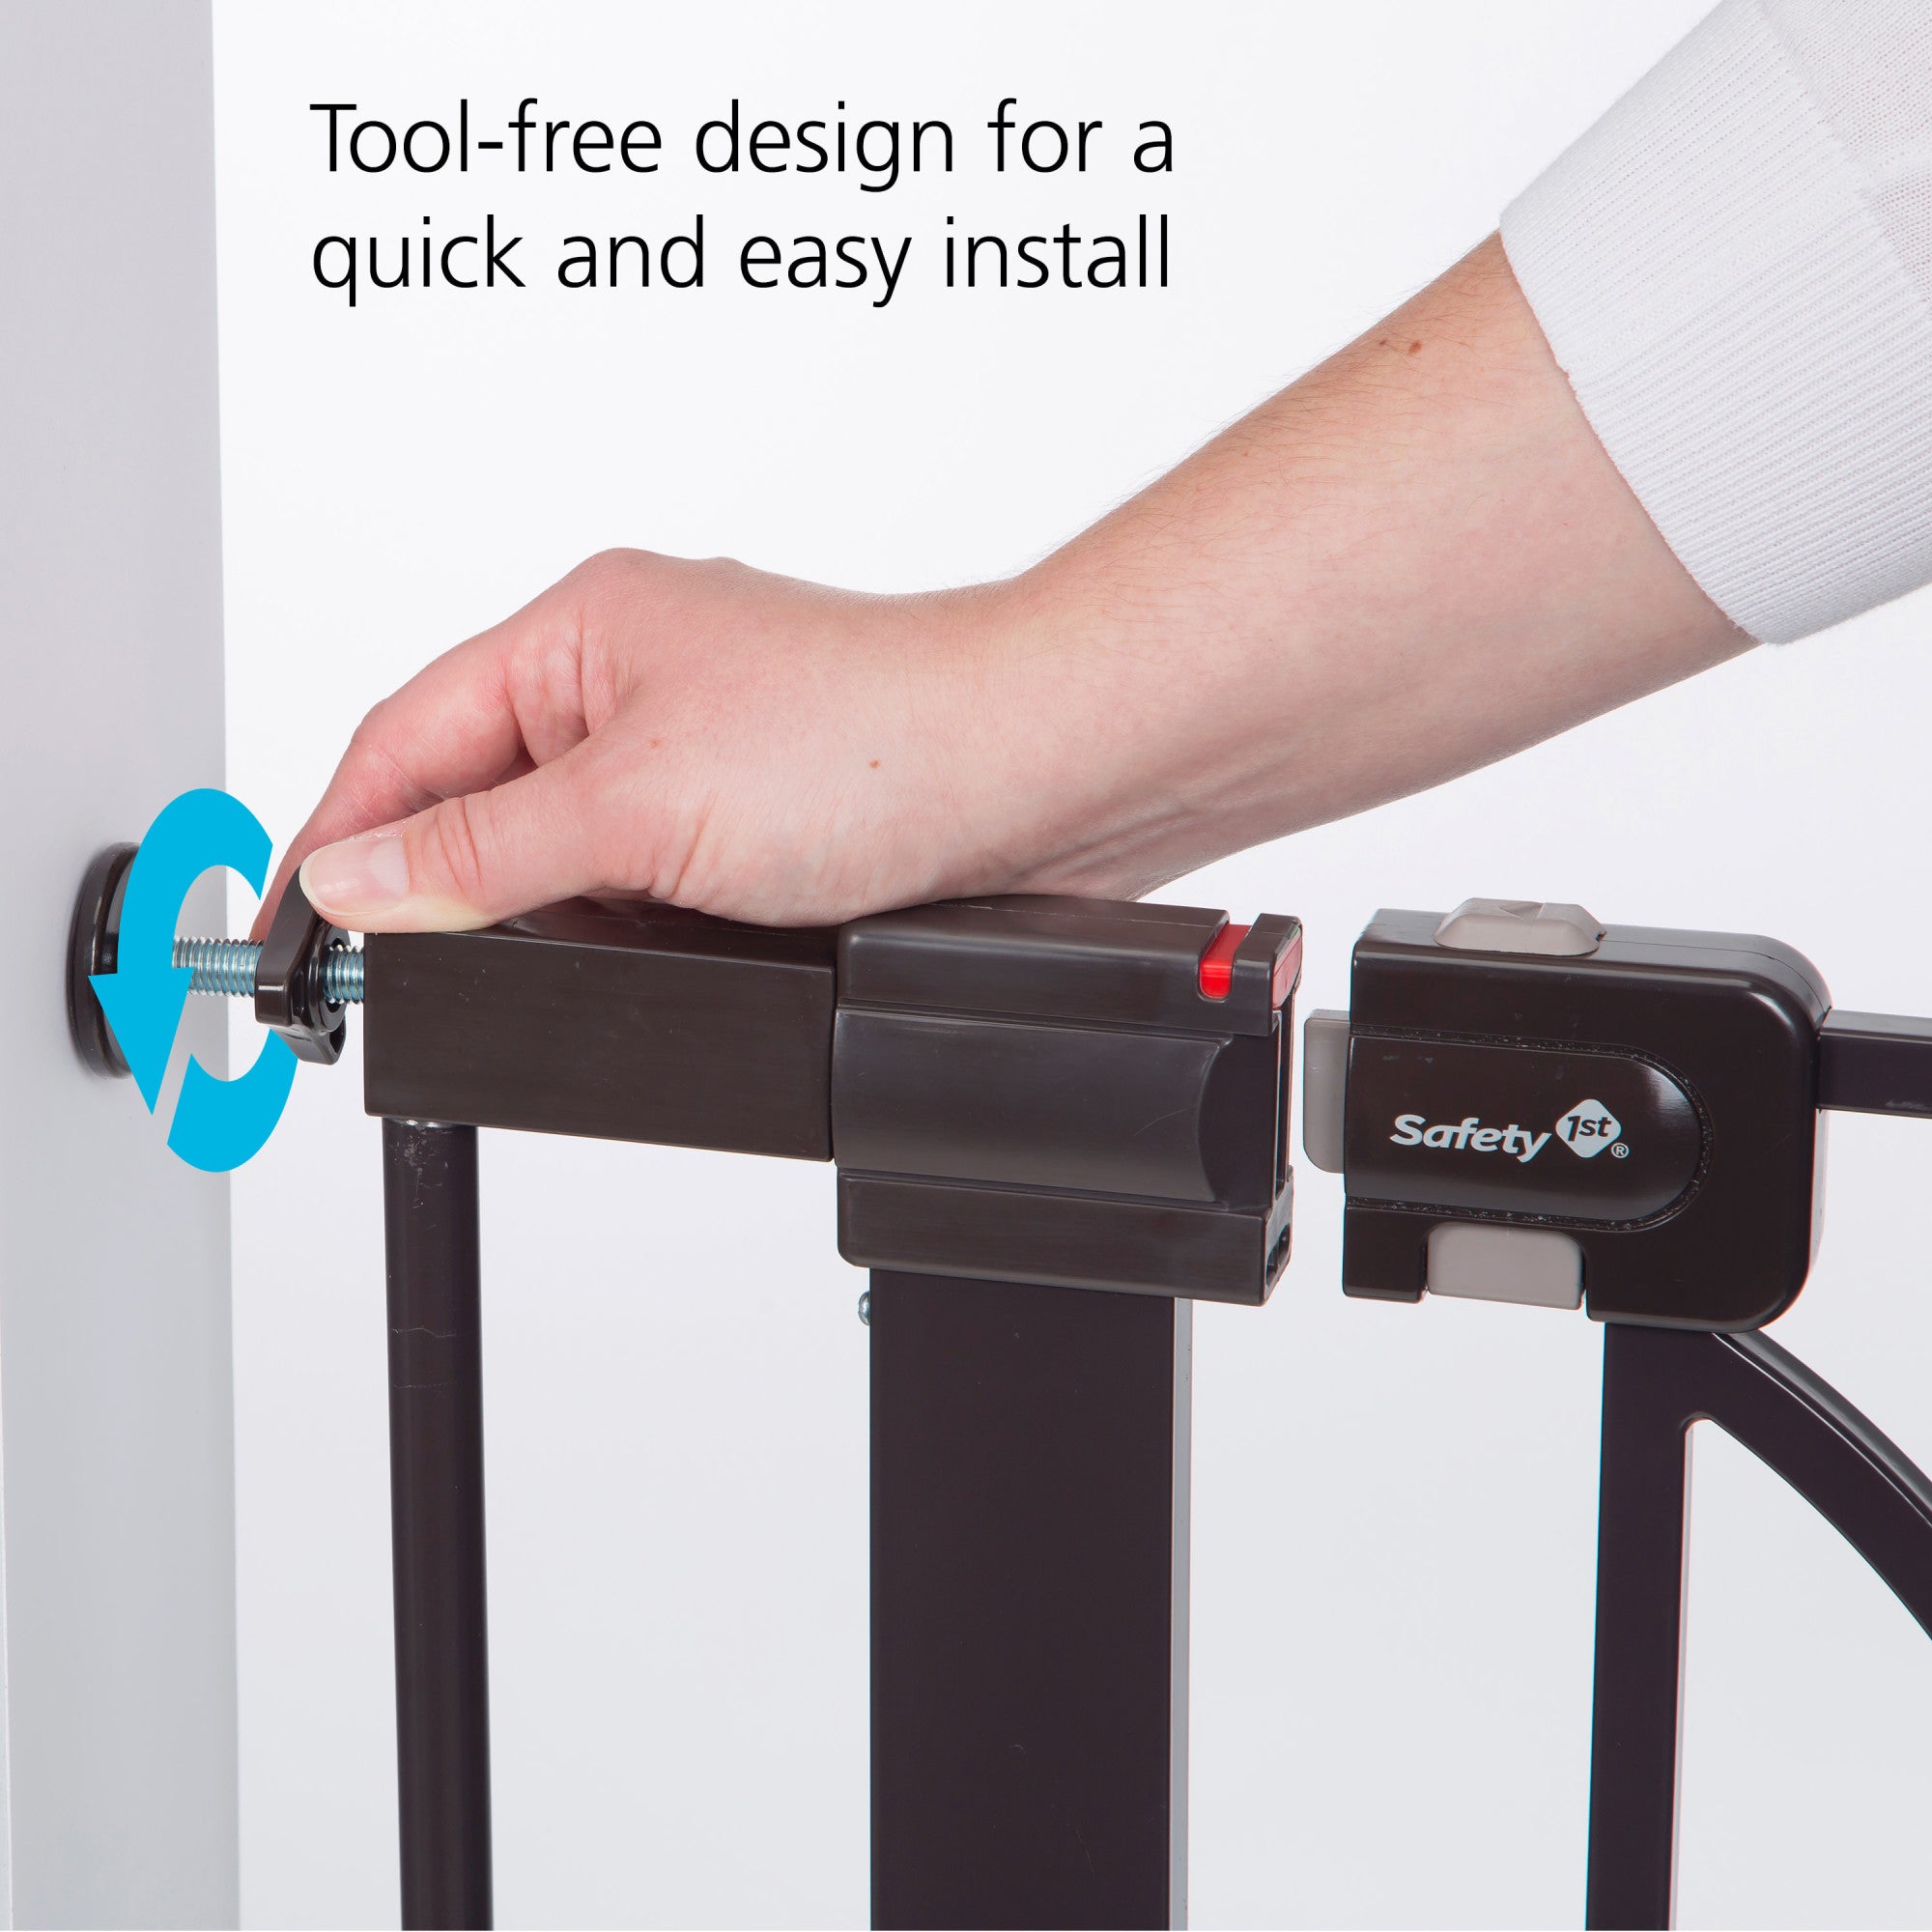 Tool-free design for a quick and easy install